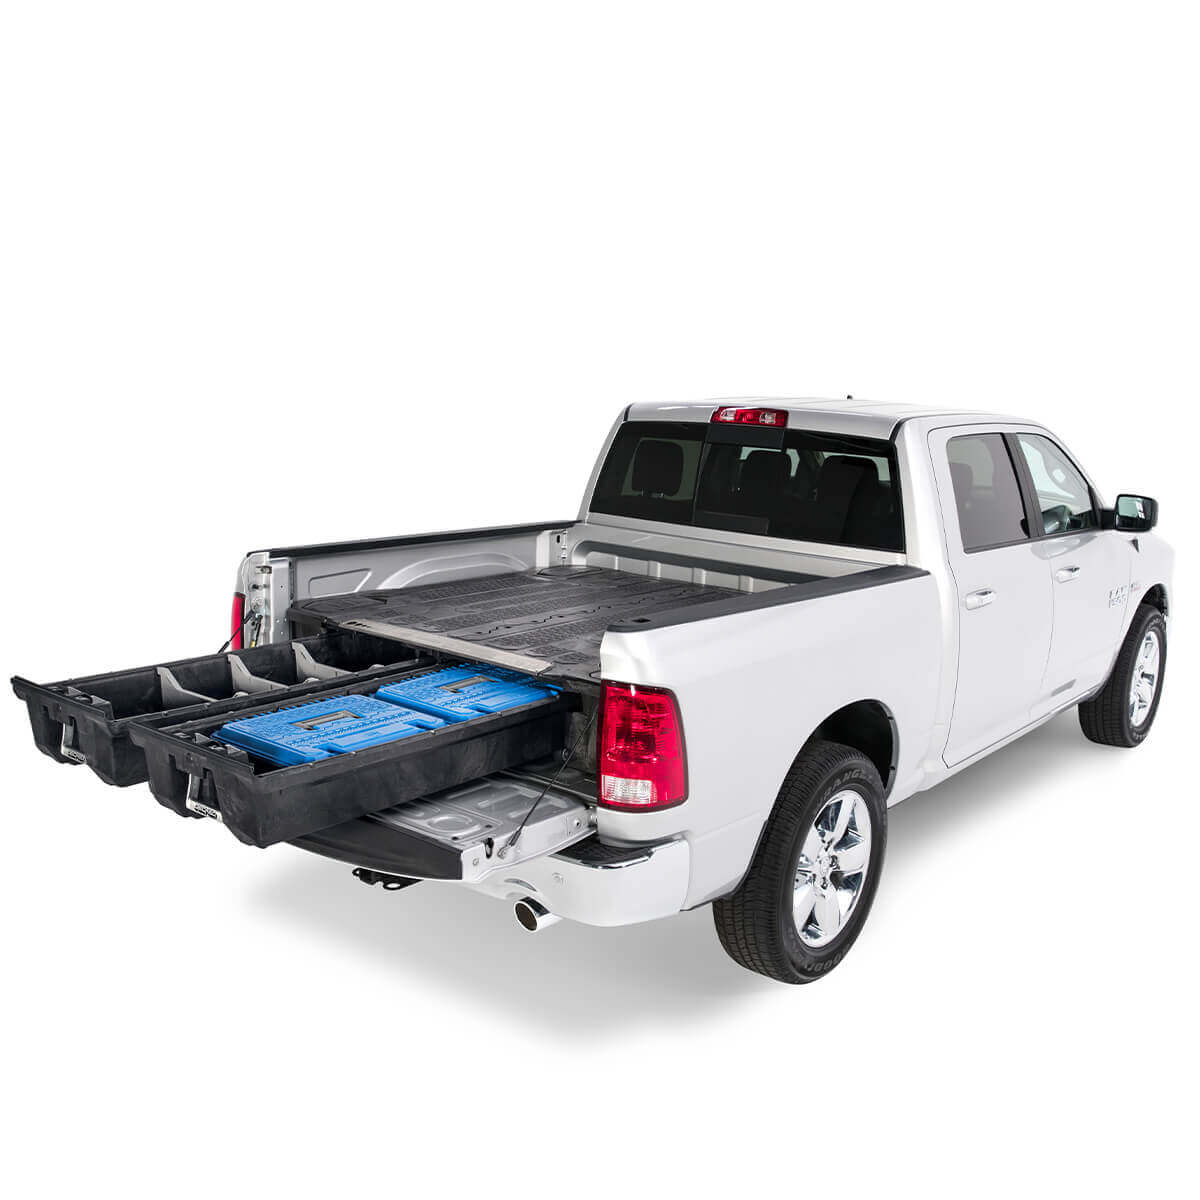 Decked Storage System for Dodge RAM 1500 (2009-2018) and RAM 1500 Classic (2019+), 5ft. 7in. Bed